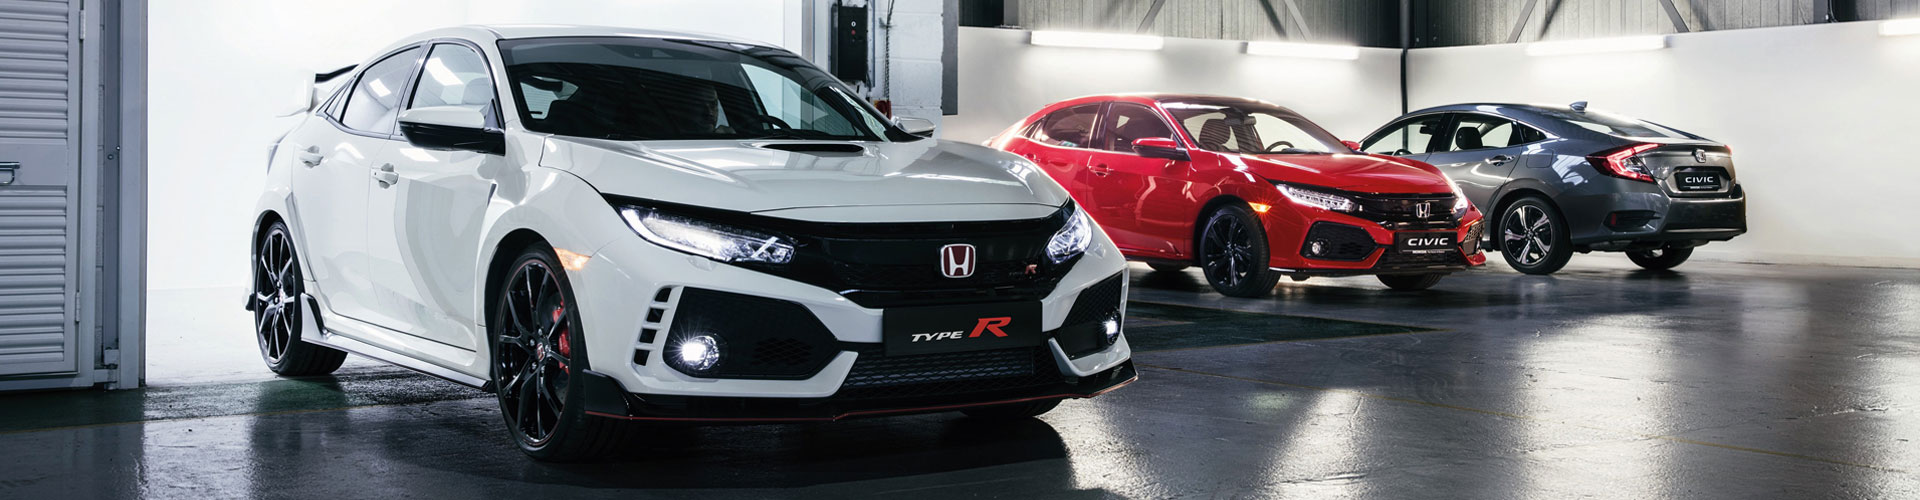 Honda Civic Type R wins Best Hot Hatch of the Year